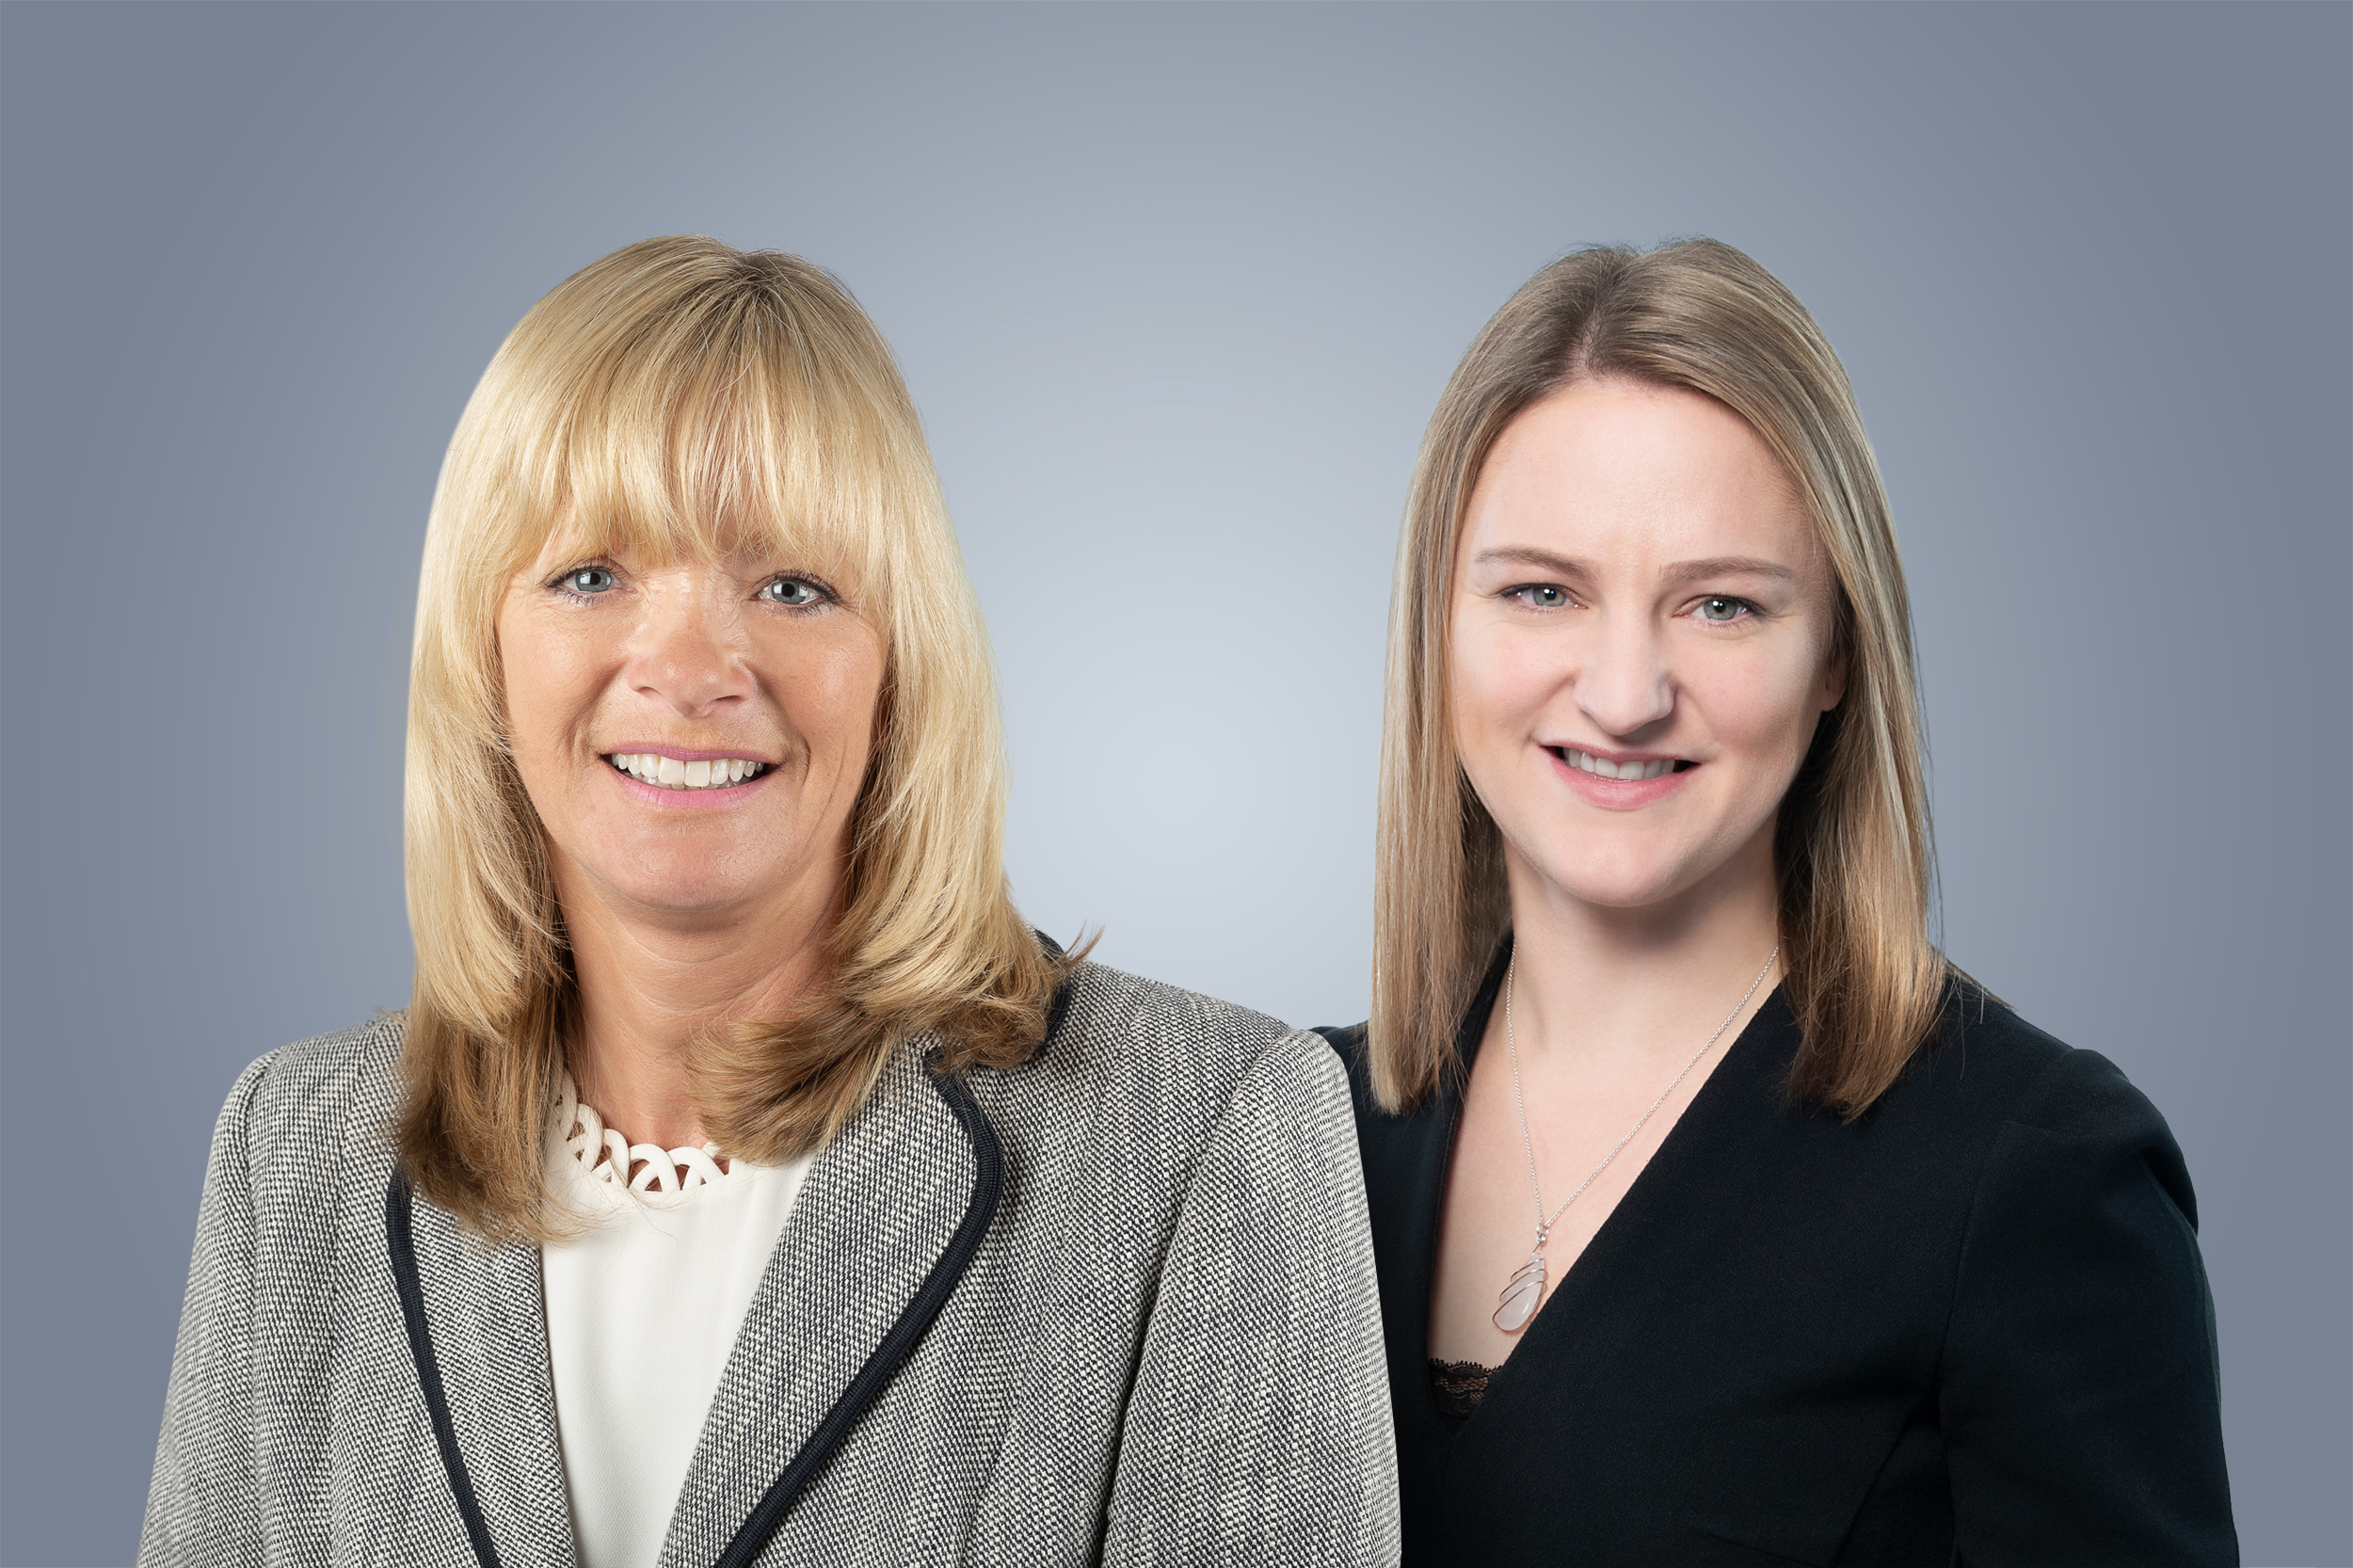 Liz Nursey and Melanie Ison side by side smiling in professional photos